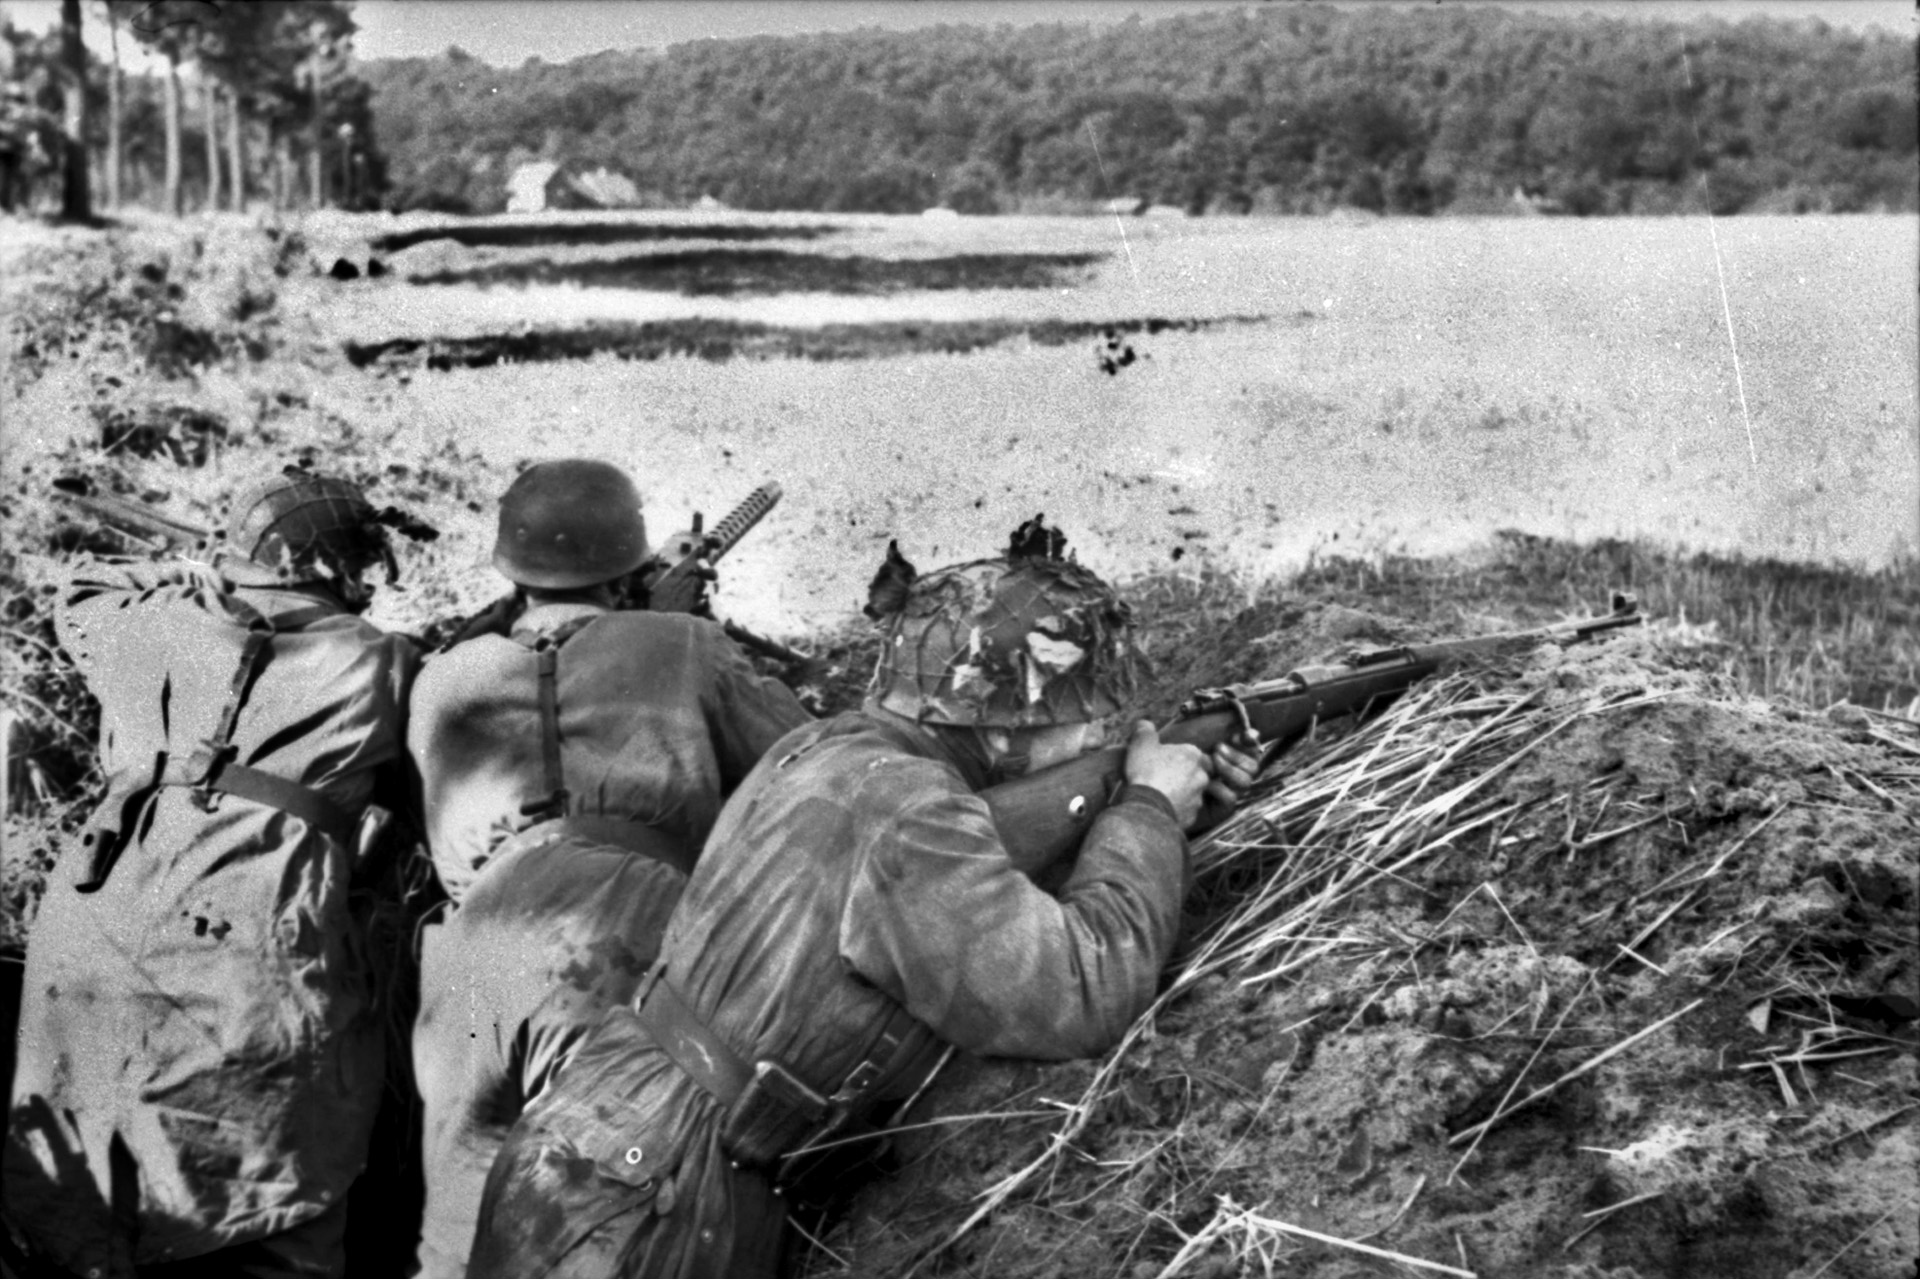 During the early stages of Operation Market-Garden, German paratroopers, or Fallschirmjager, are pictured manning defensive positions. The Fallschirmjager had a fierce reputation as highly trained combat troops, but many of them were killed or captured while fighting as infantry during Market-Garden.